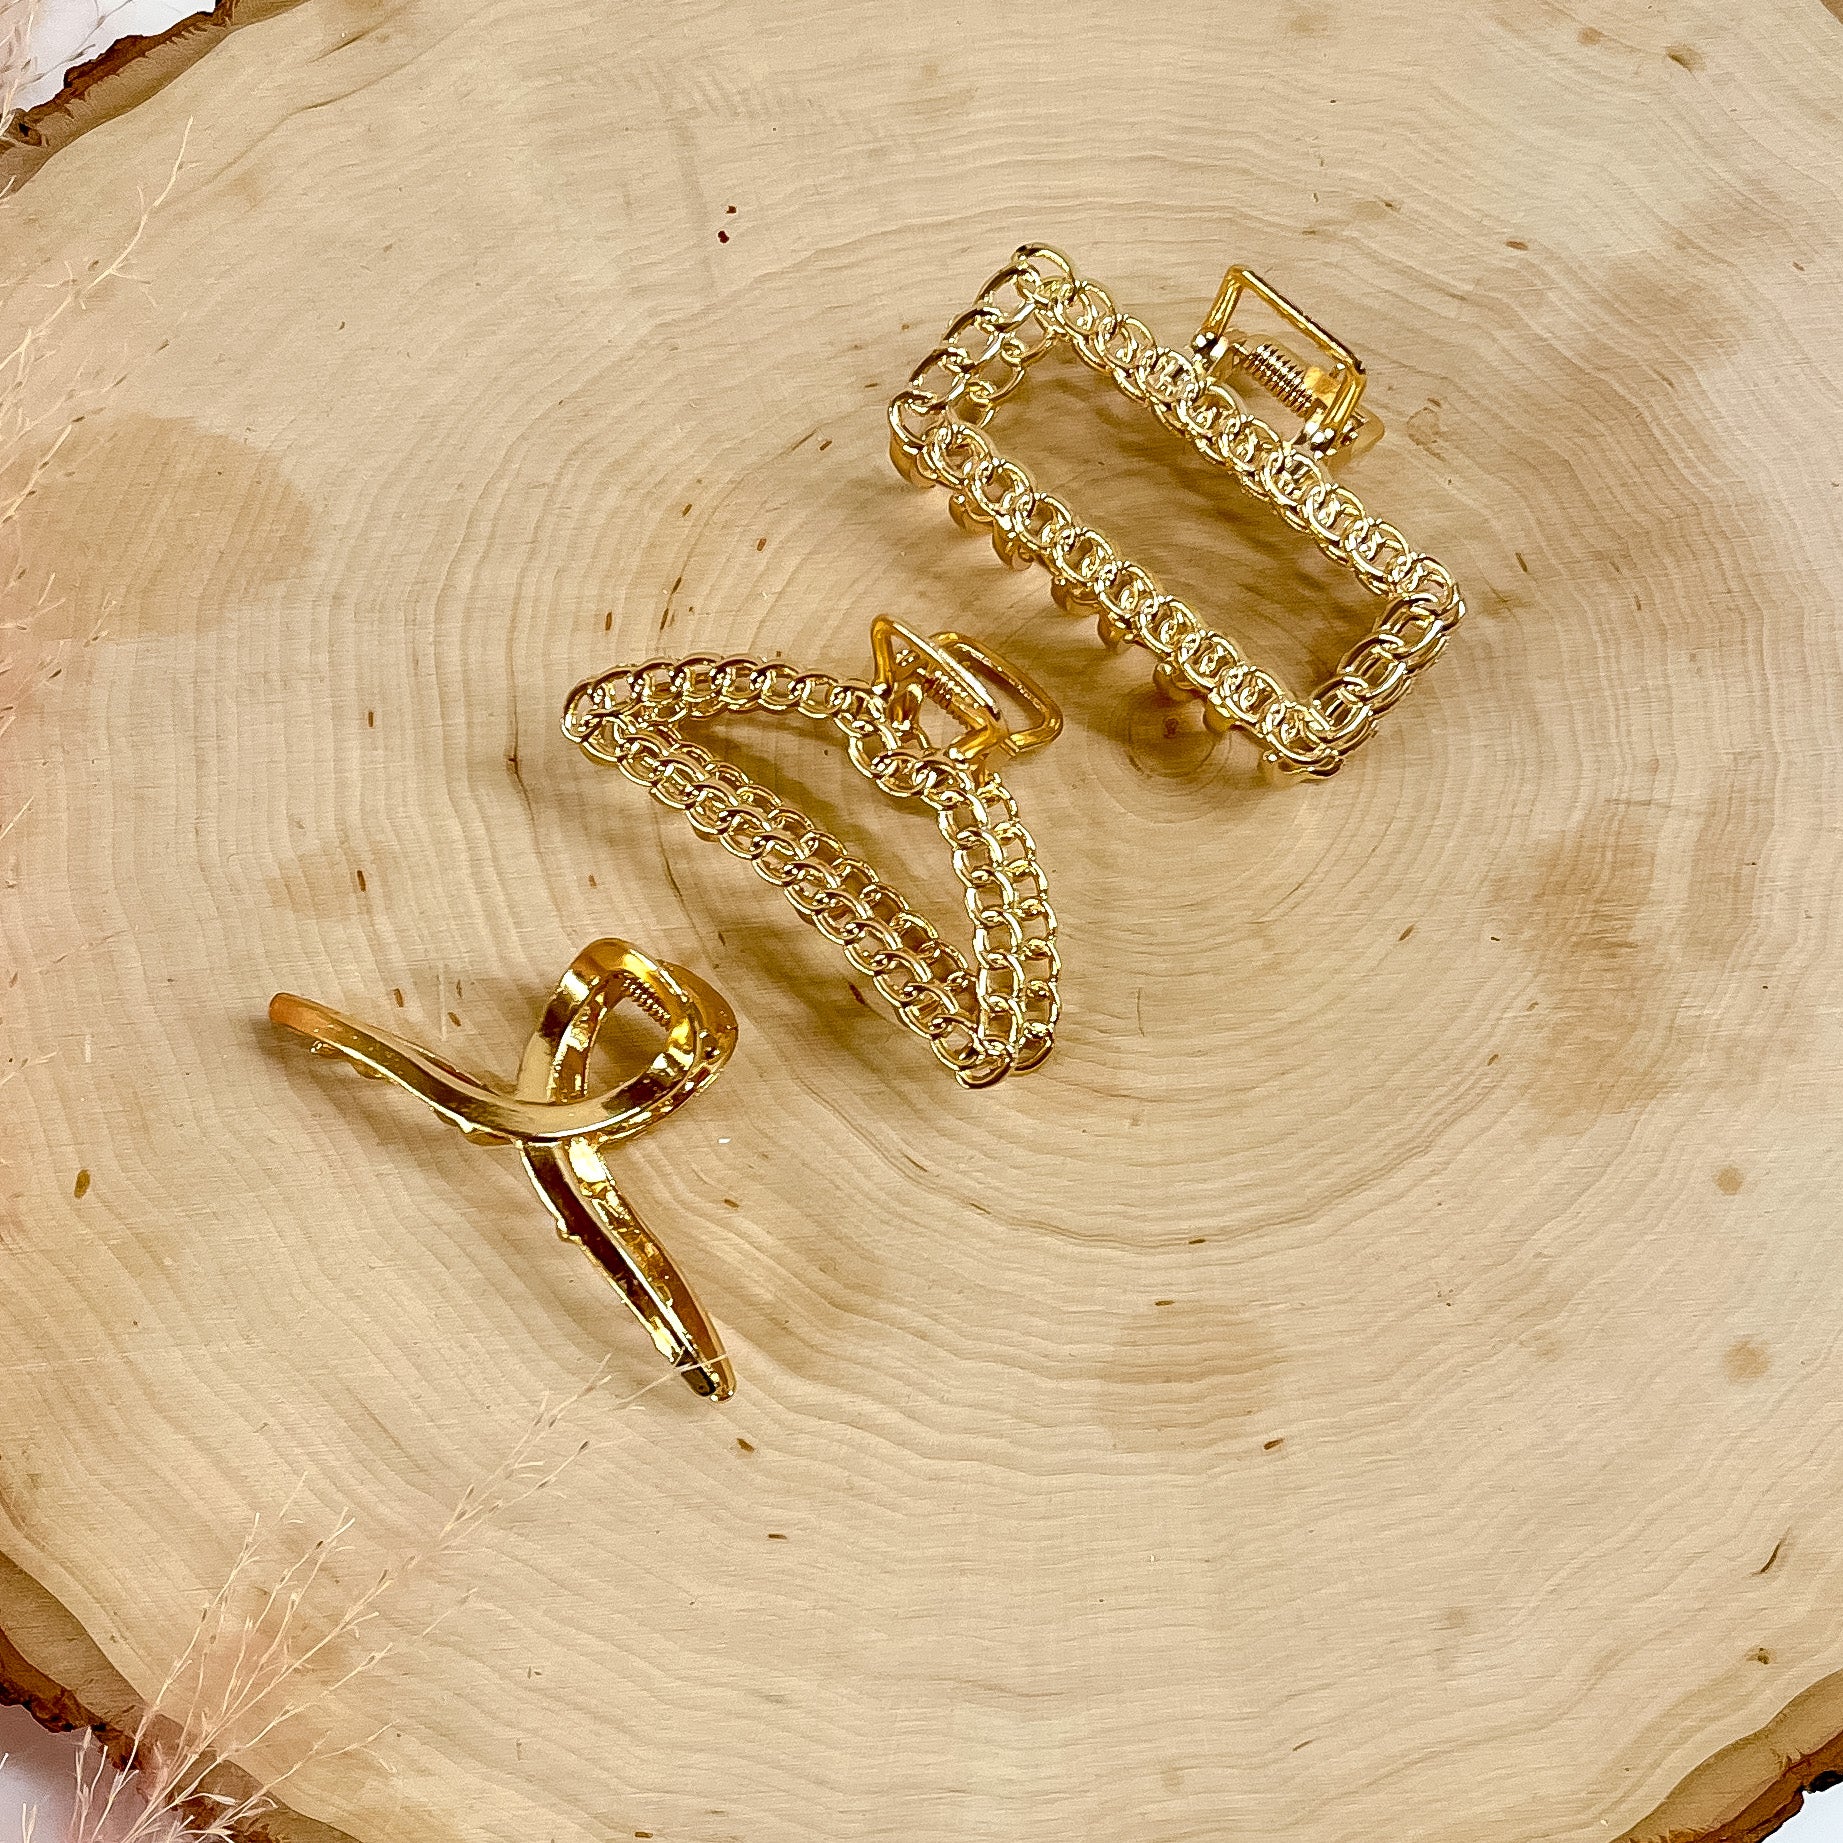 There are three gold small clips layingn on a slab of wood, all three clips have different textures and shapes. From top to bottom; rectangle chain , dome chain texturesd, and smooth loop.